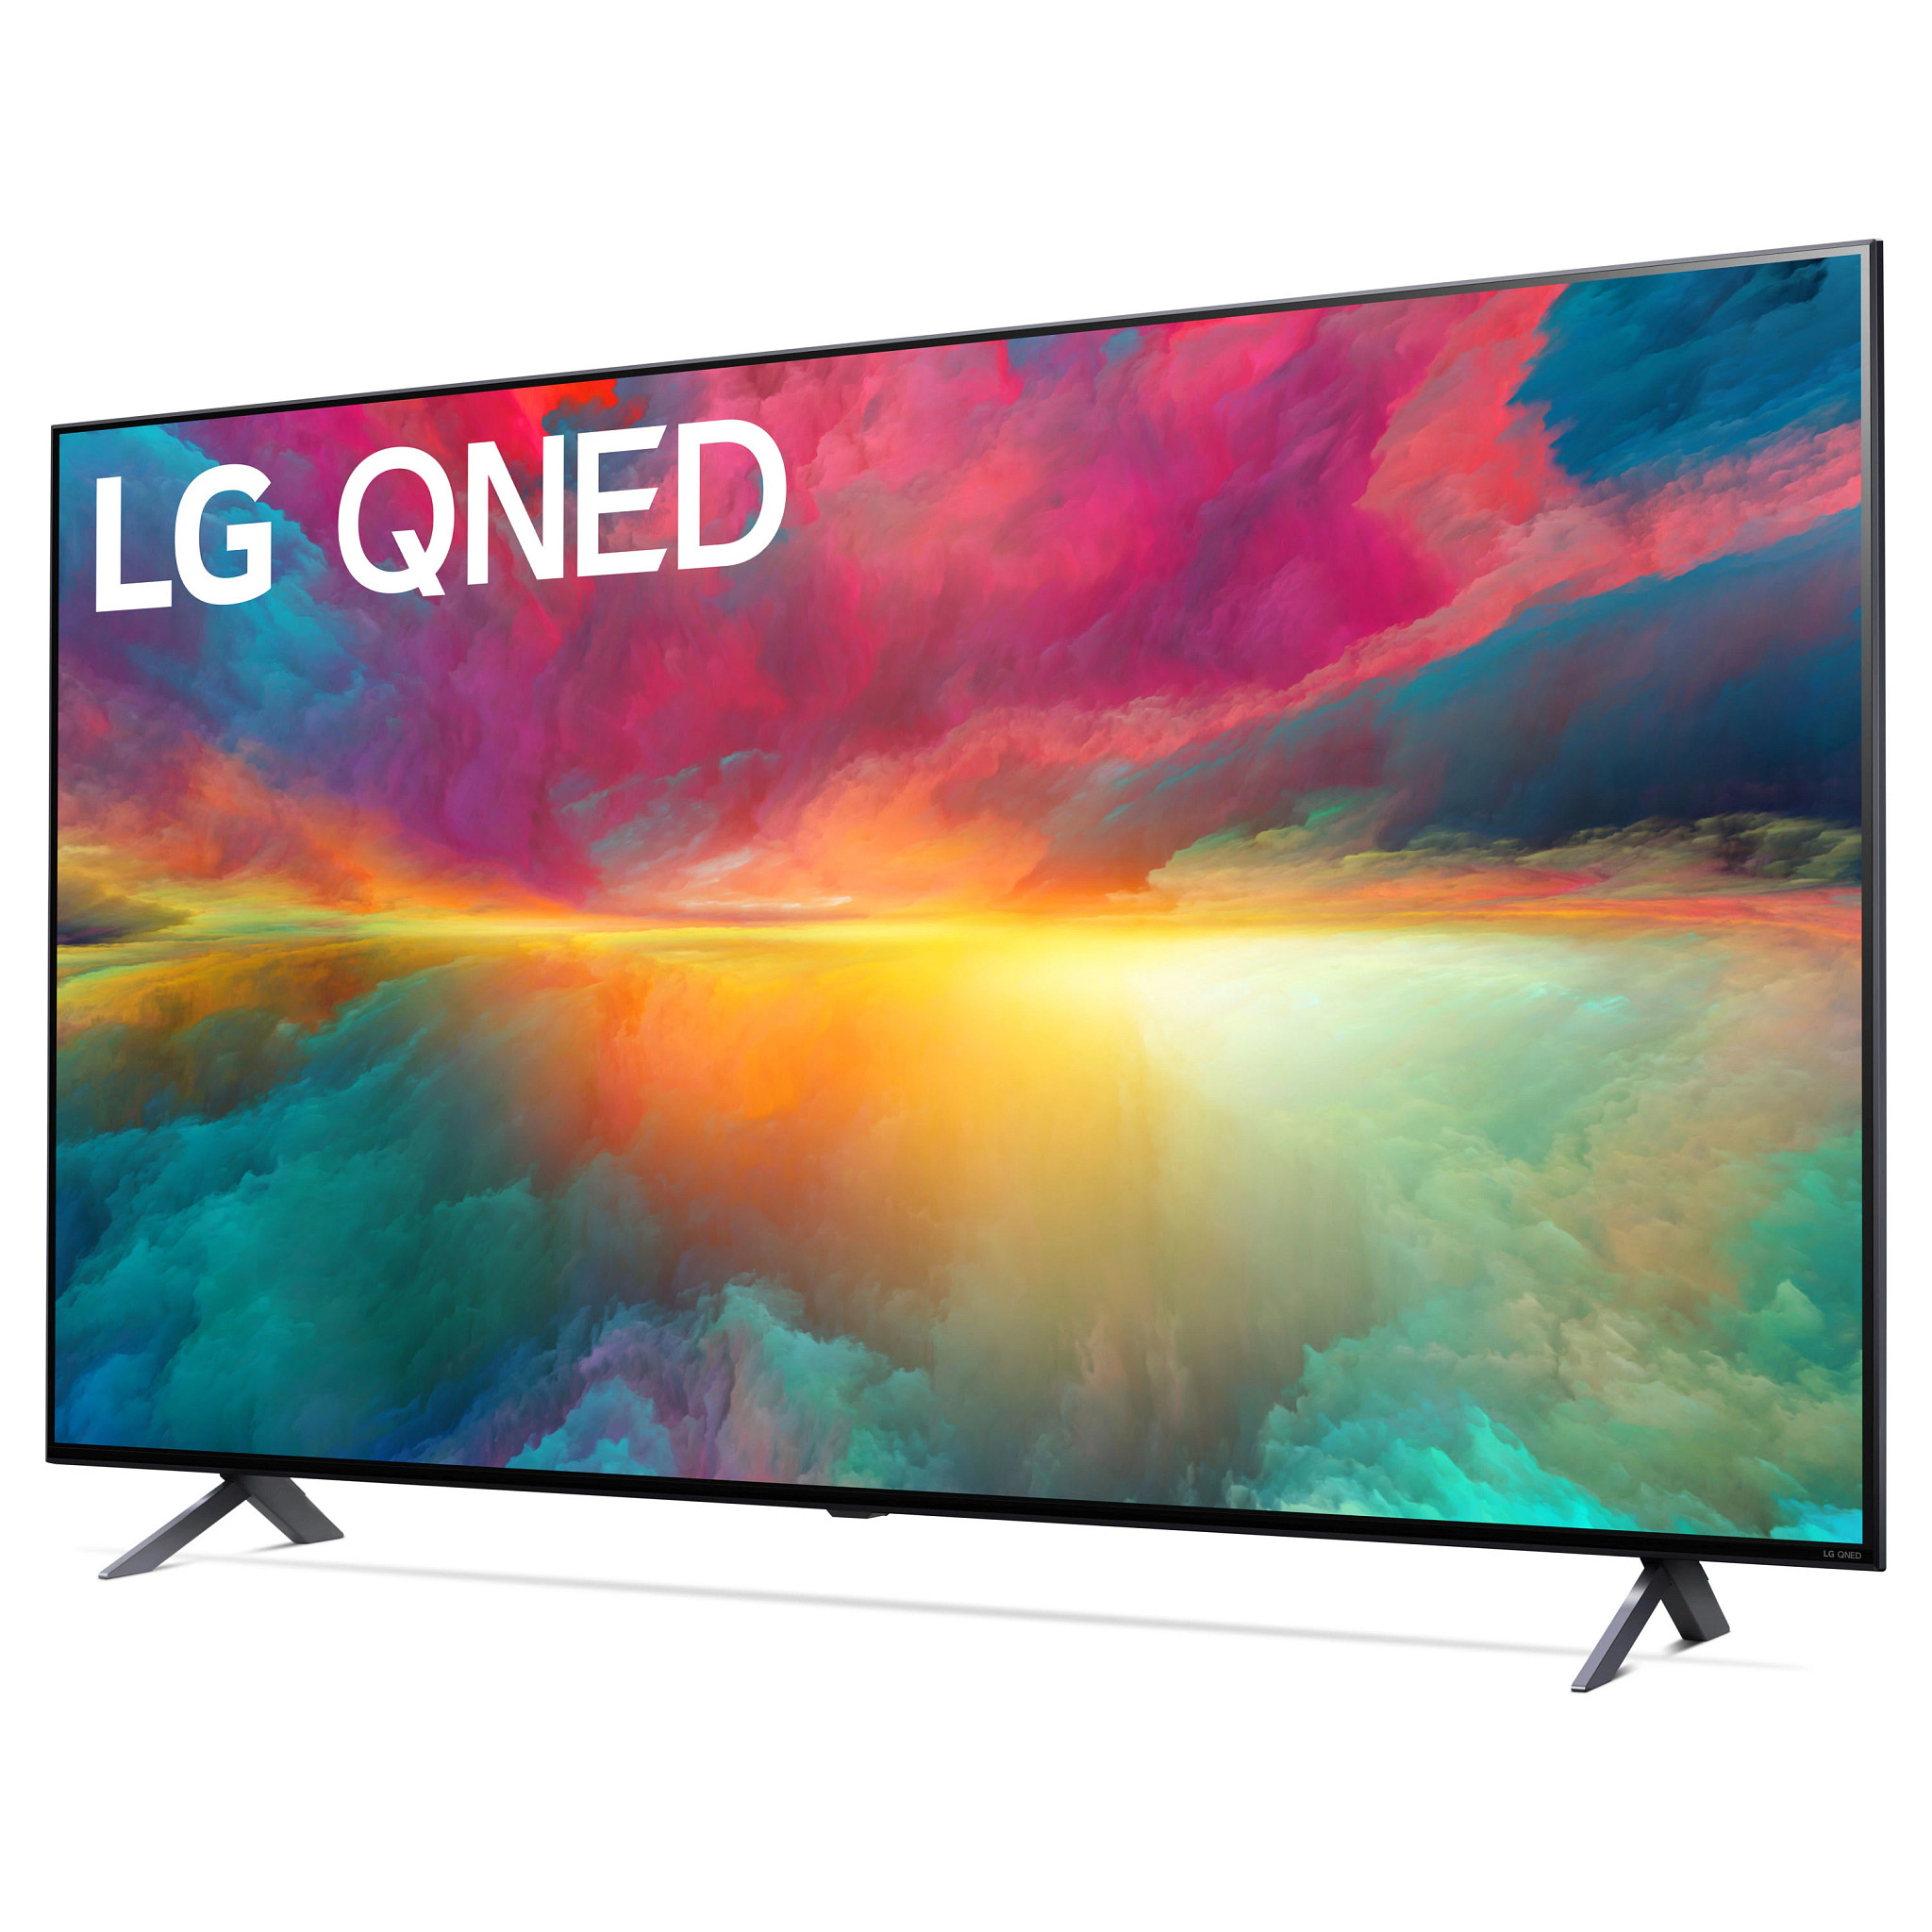 LG 75 inch Class 4K UHD QNED Web OS Smart TV with HDR 75 Series (75QNED75URA) - image 2 of 7